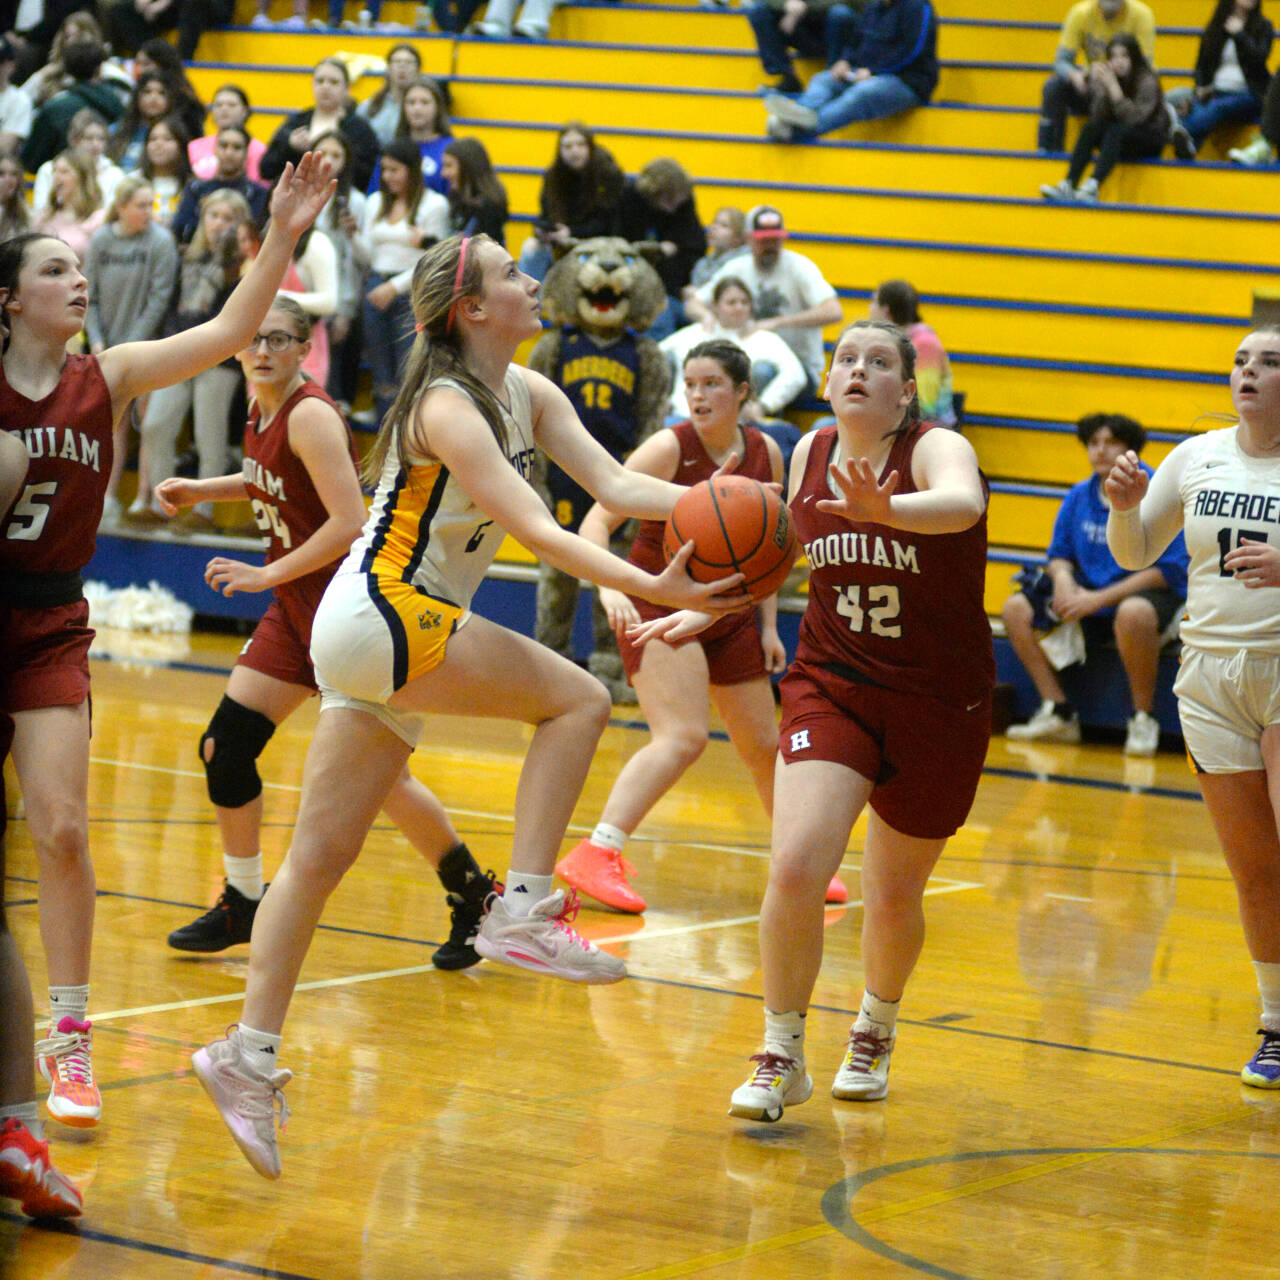 RYAN SPARKS | THE DAILY WORLD Aberdeen senior Annie Troeh, left, scores on a scoop shot against Hoquiam’s Sydney Gordon (42) during the Bobcats’ 55-25 win on Monday in Aberdeen.